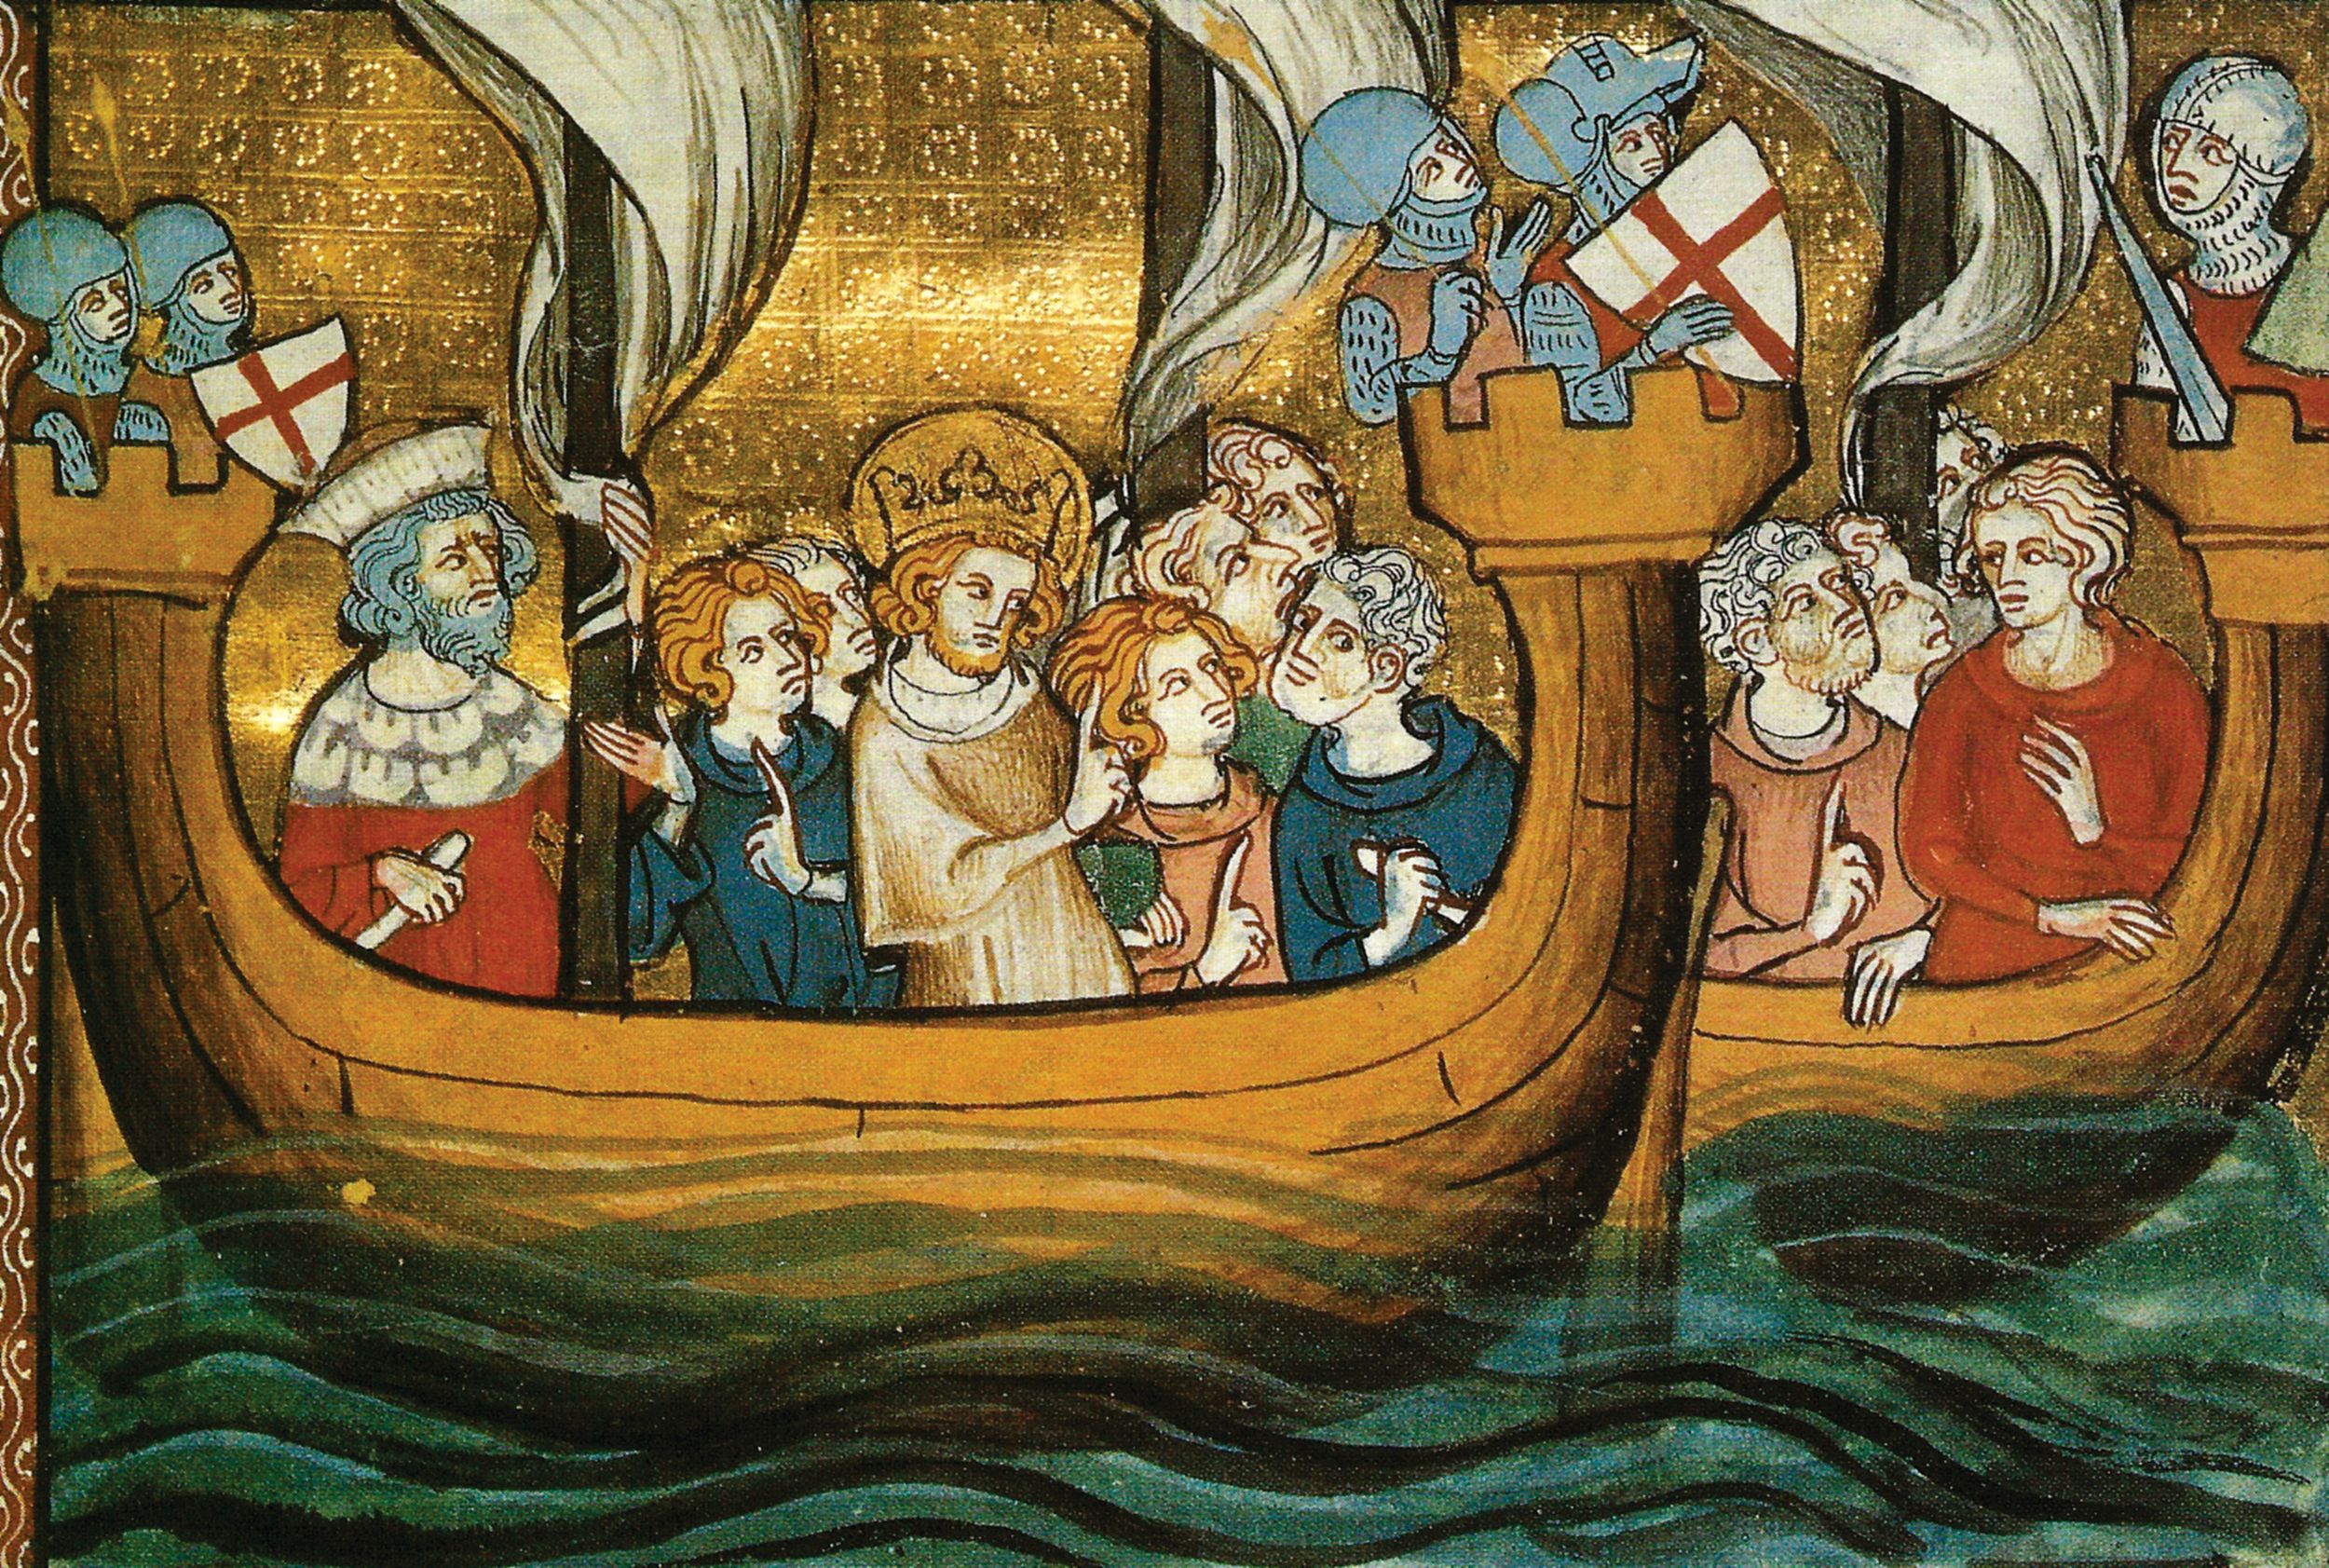 This illustration dating from the 1300s depicts King Louis IX of France as a saint departing Cyprus with his assembled army, which had lingered there for months as it waited for all his forces to arrive.